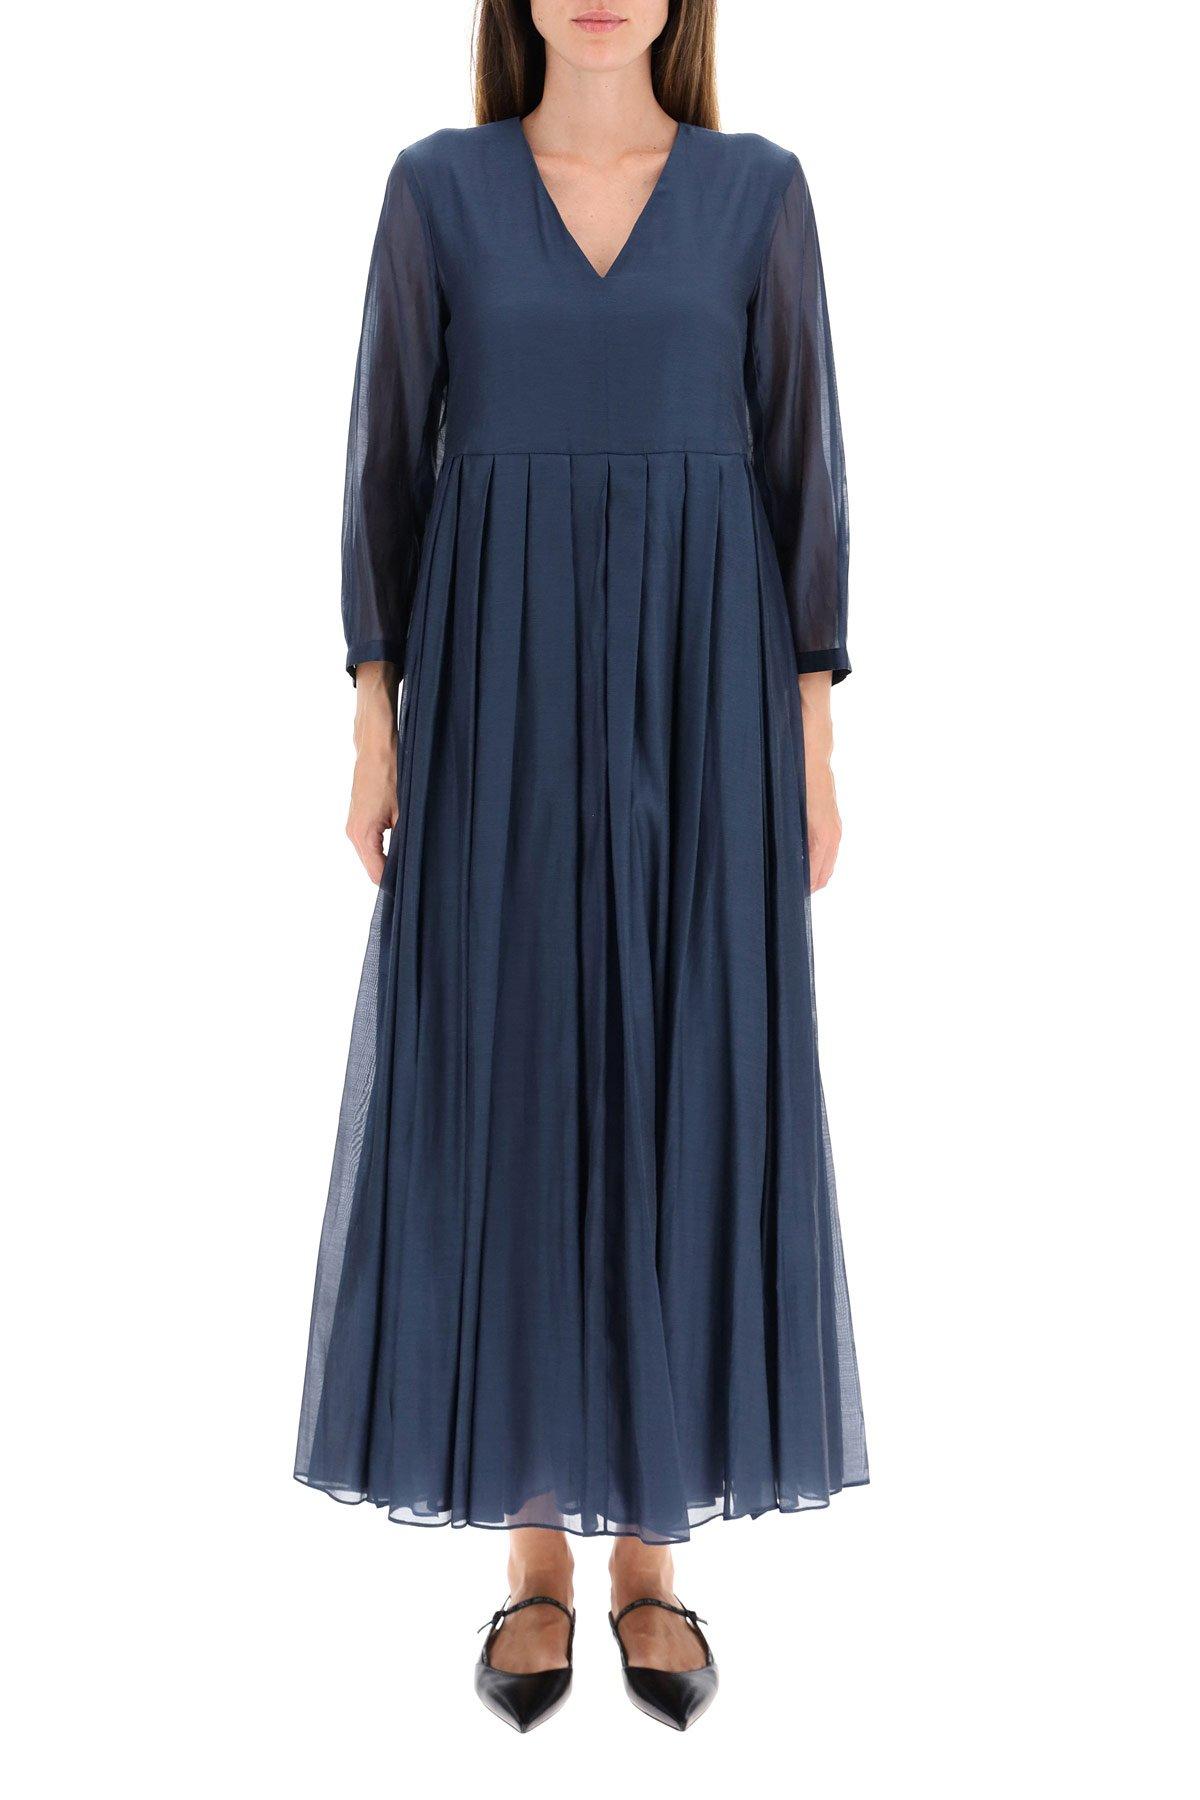 Max Mara Cotton Corolla Voile Dress in Blue - Save 1% - Lyst